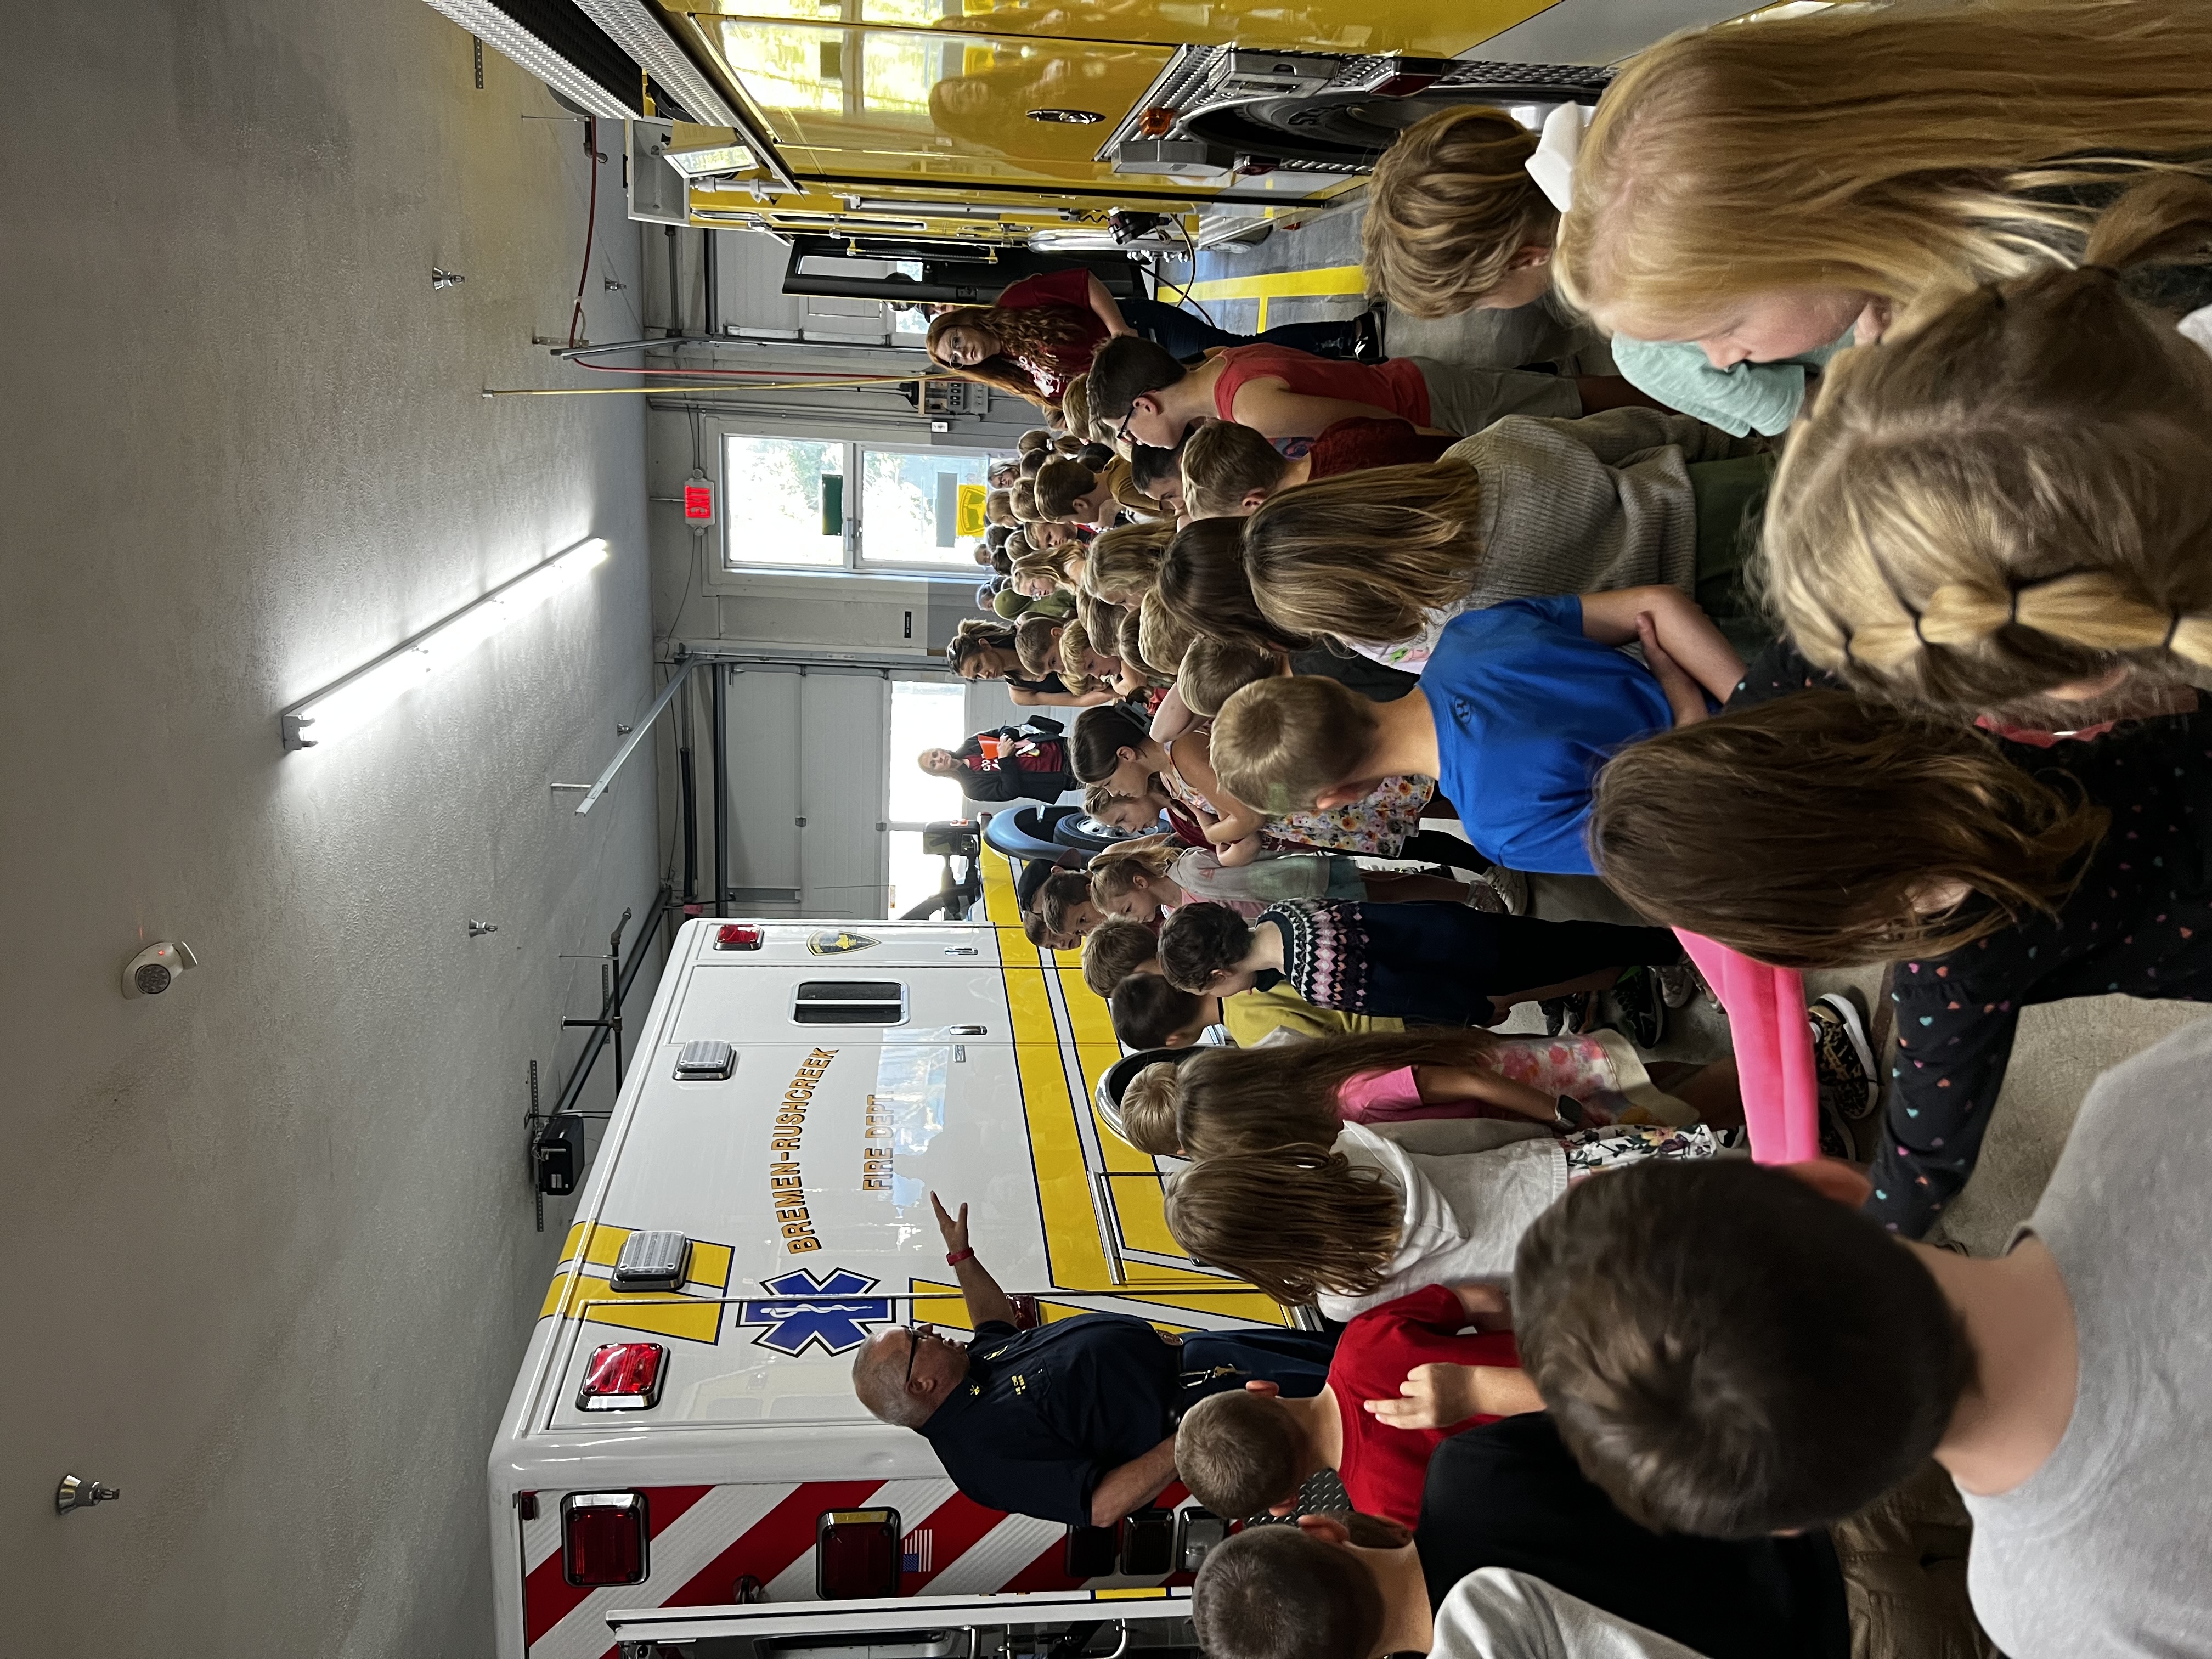 Students pictured at the firehouse